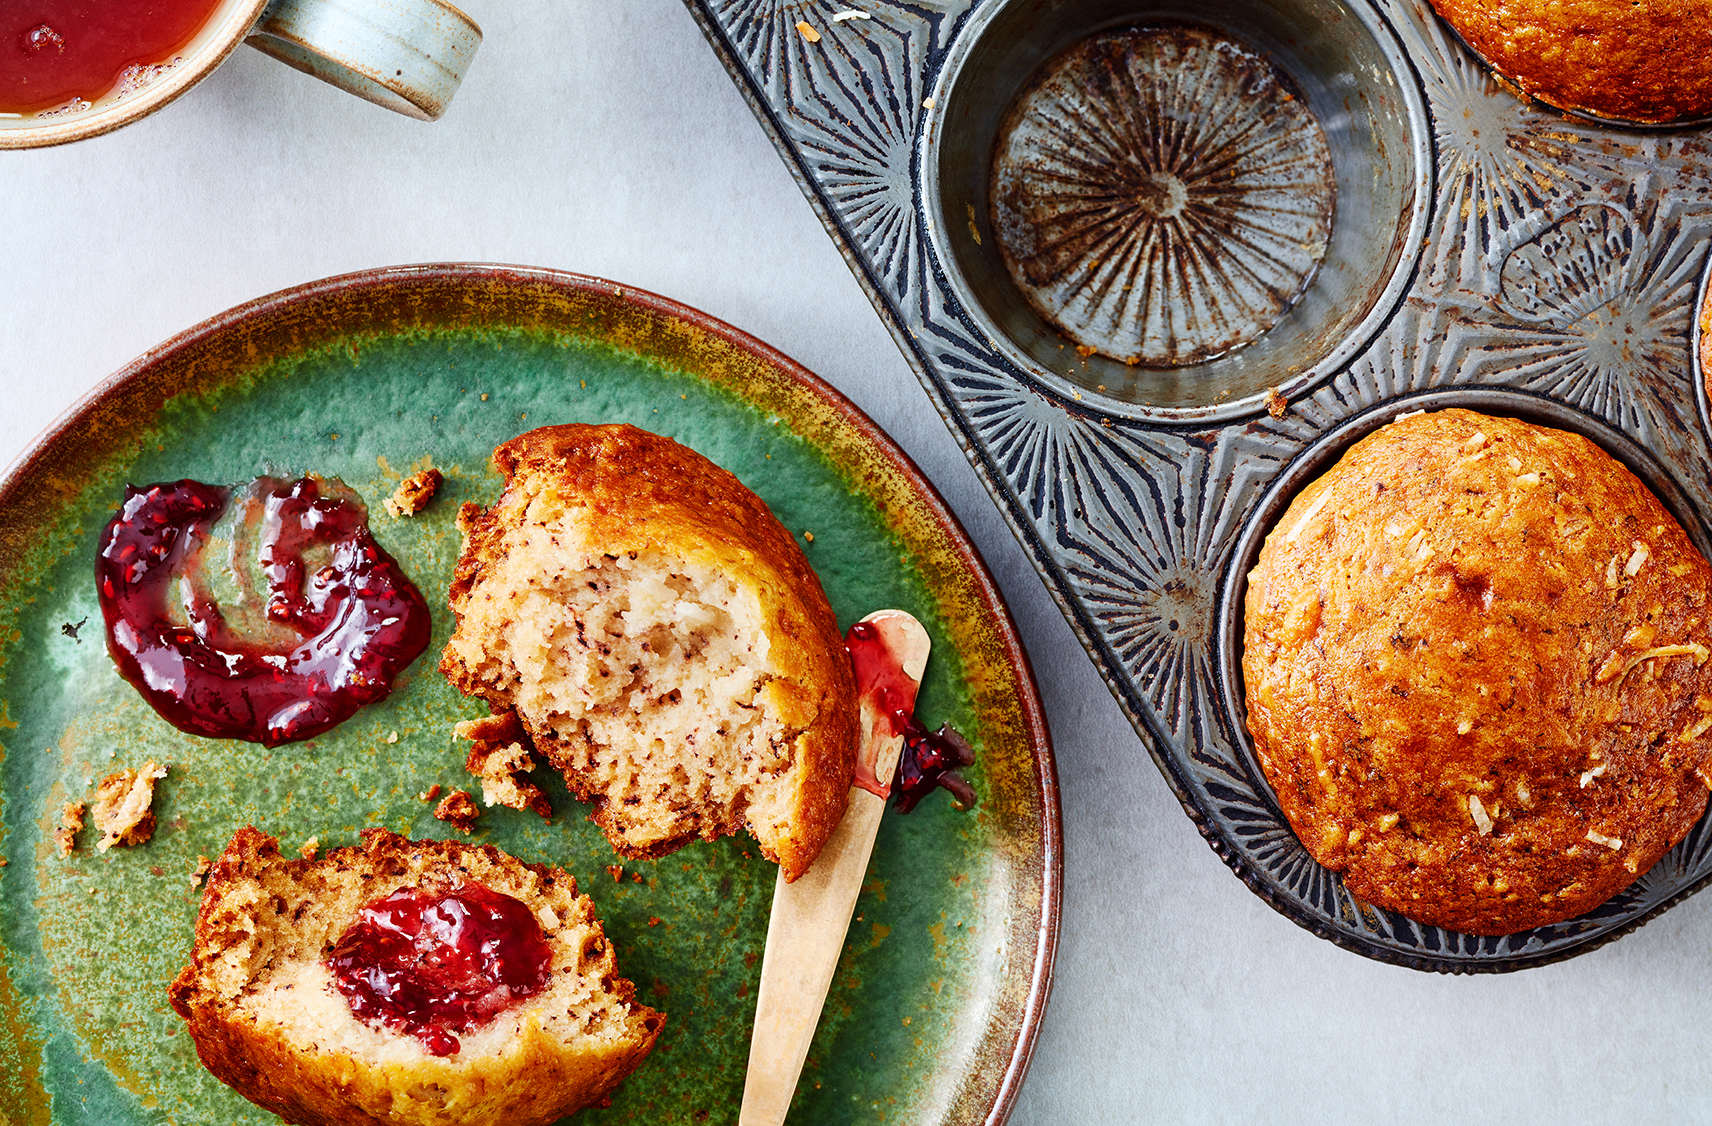 A split muffin spread with jam sits beside a pan of more muffins and a tea
